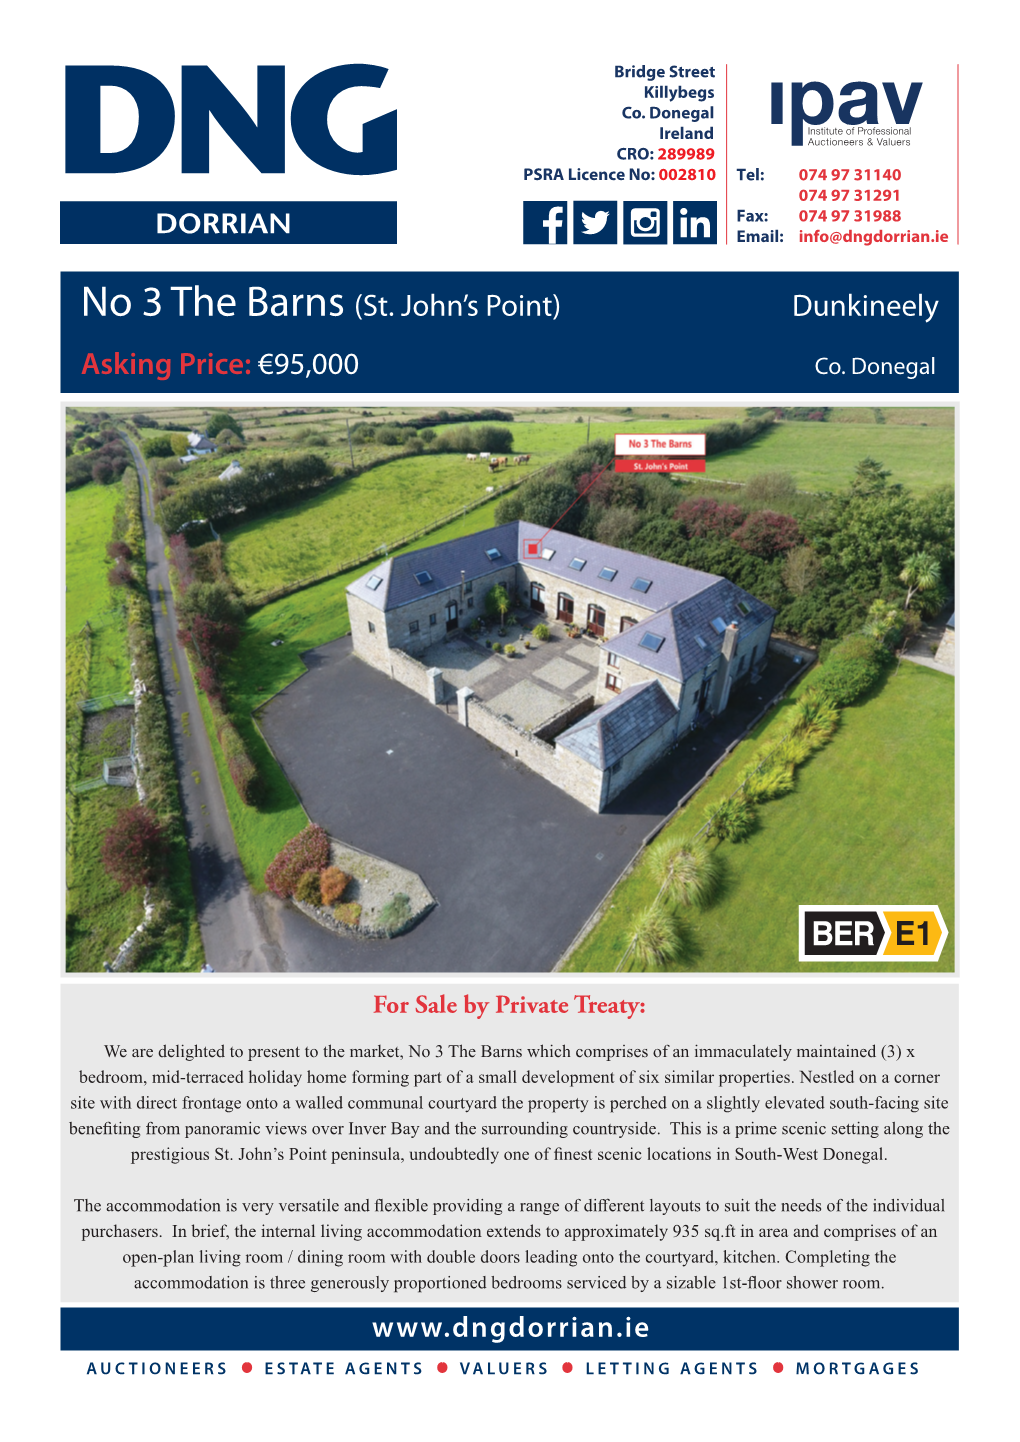 No 3 the Barns (St. John's Point) Dunkineely Asking Price: €95,000